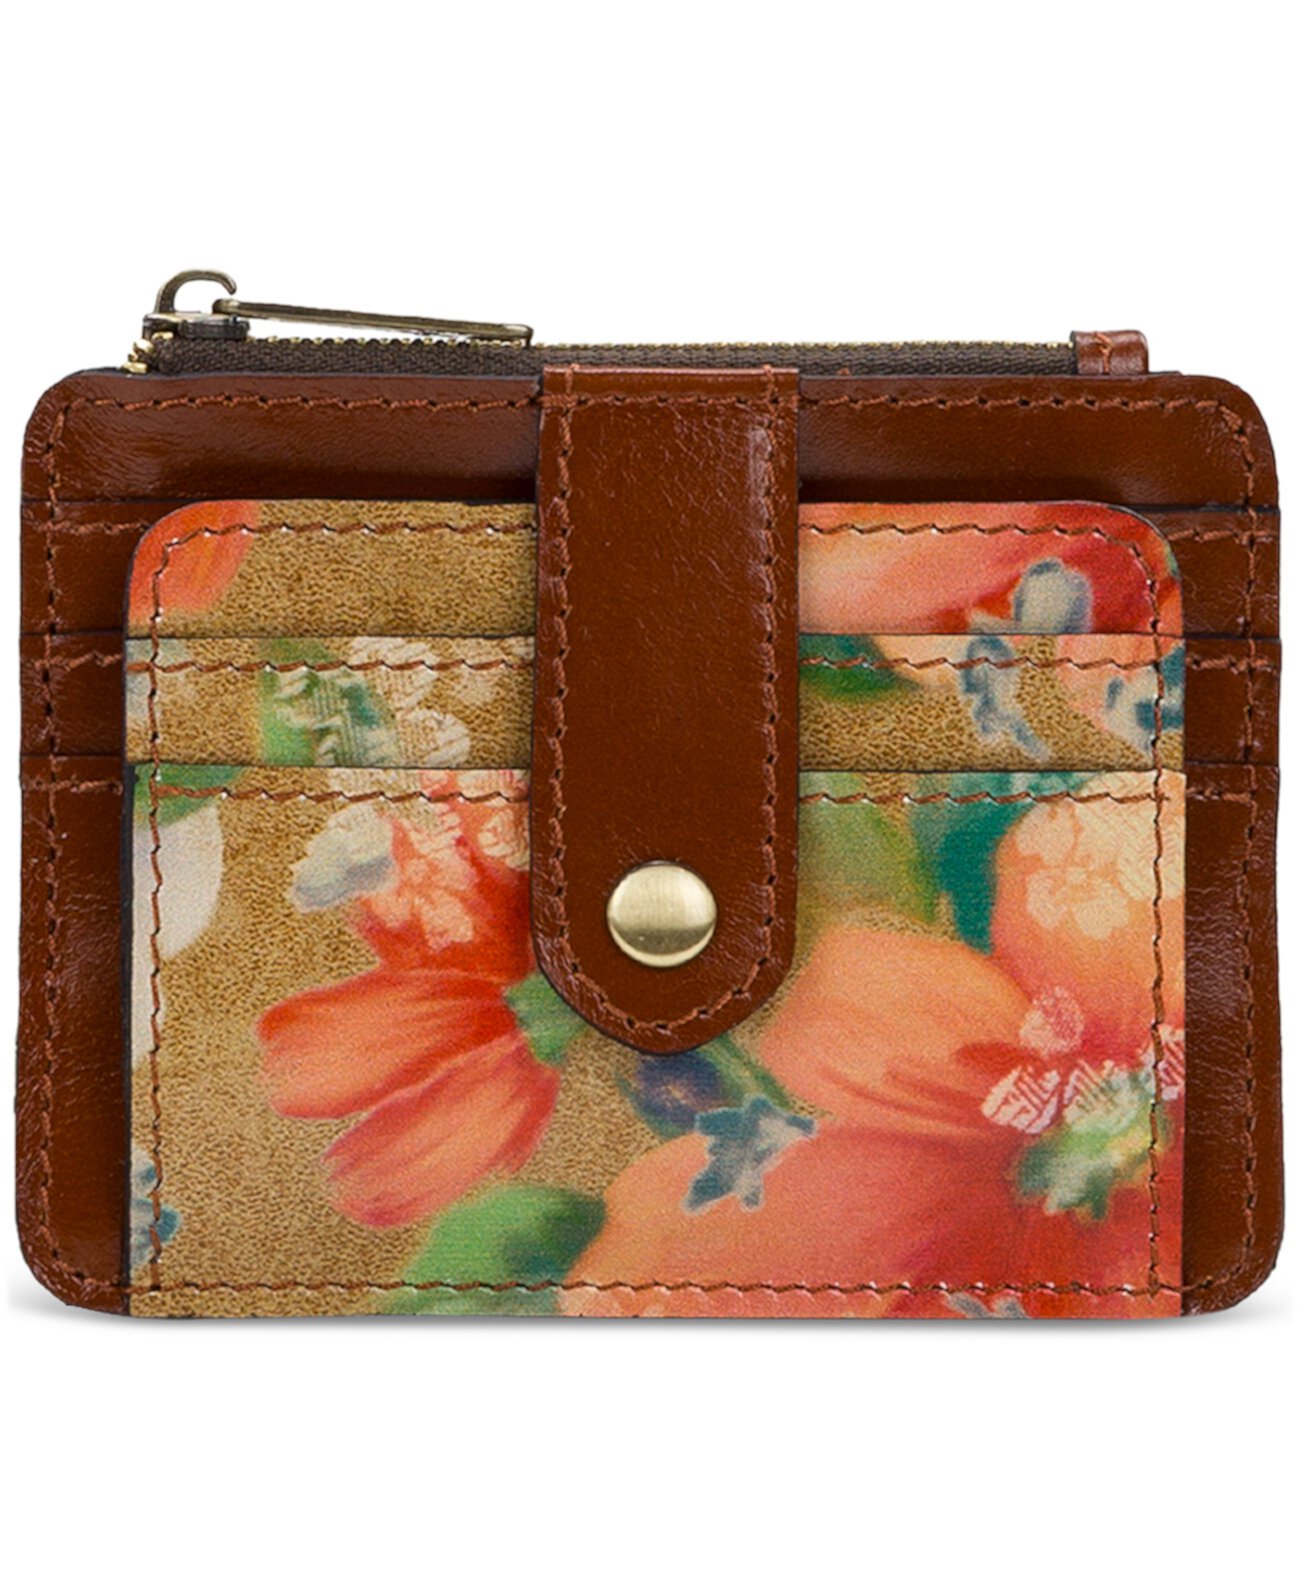 Cassis ID Small Printed Leather Wallet Patricia Nash